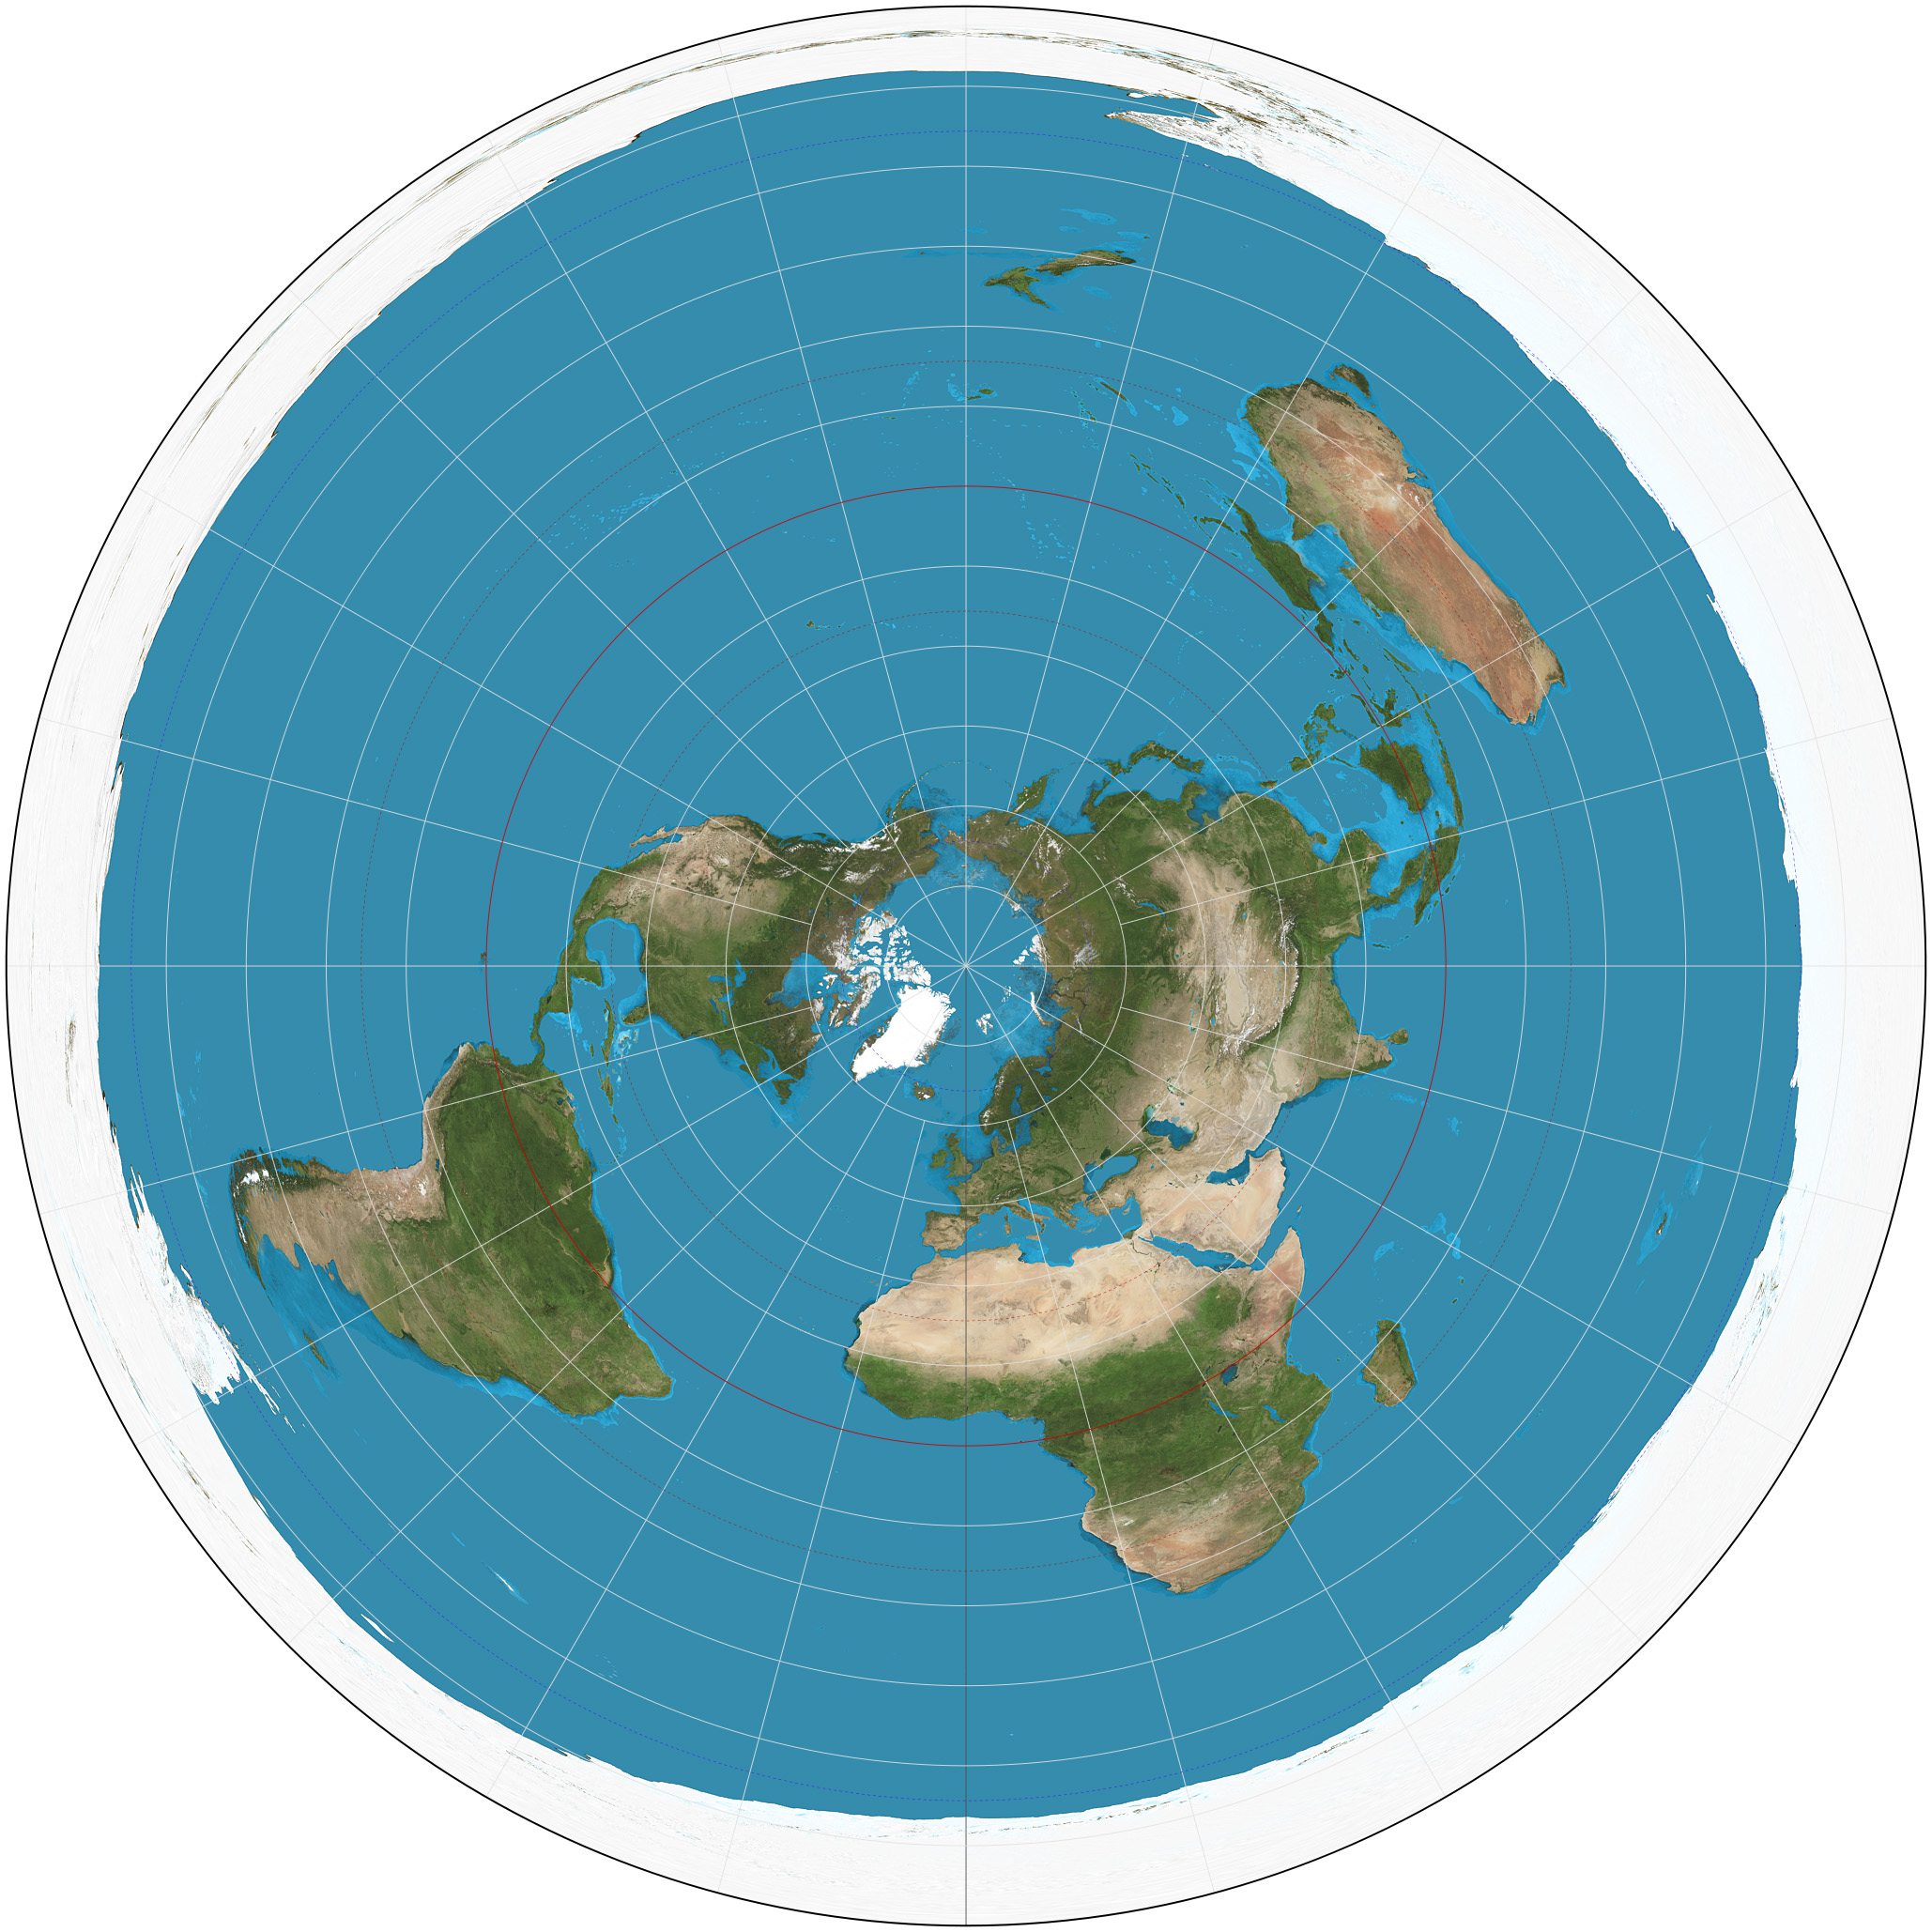 azimuthal projection interrupting the south pole